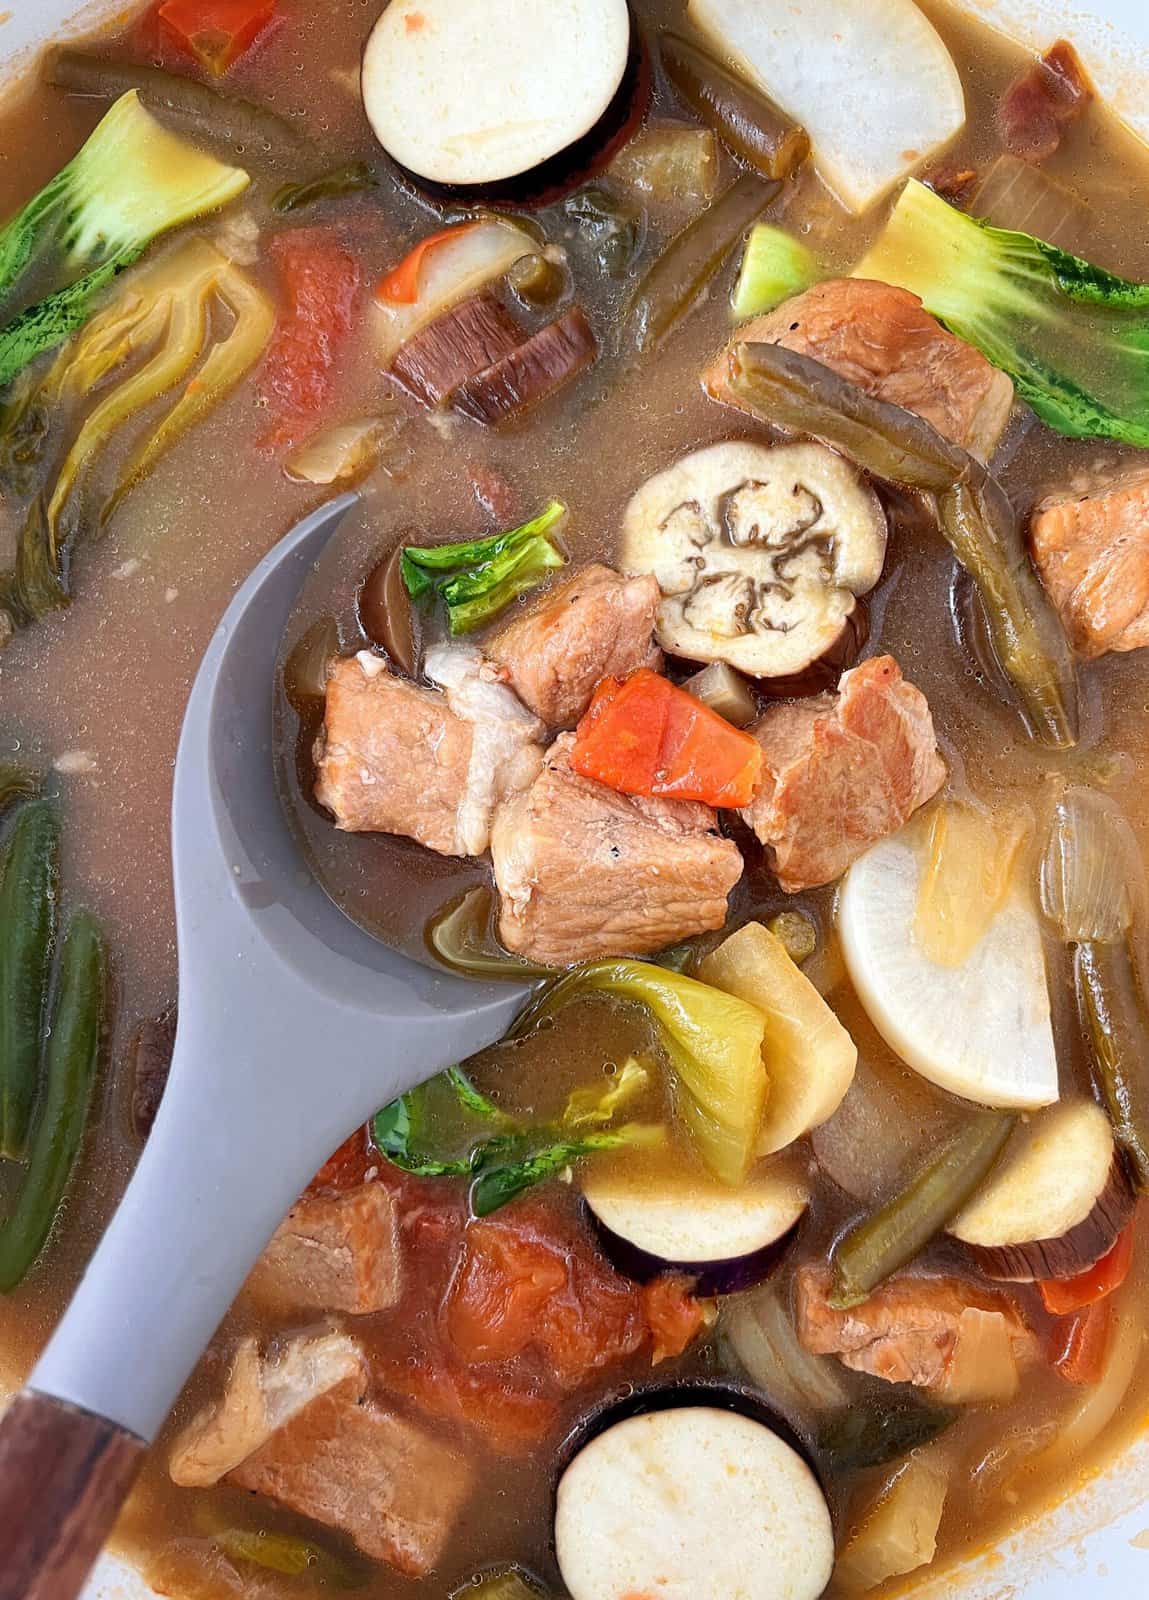 Pork sinigang soup with vegetables in a spoon 